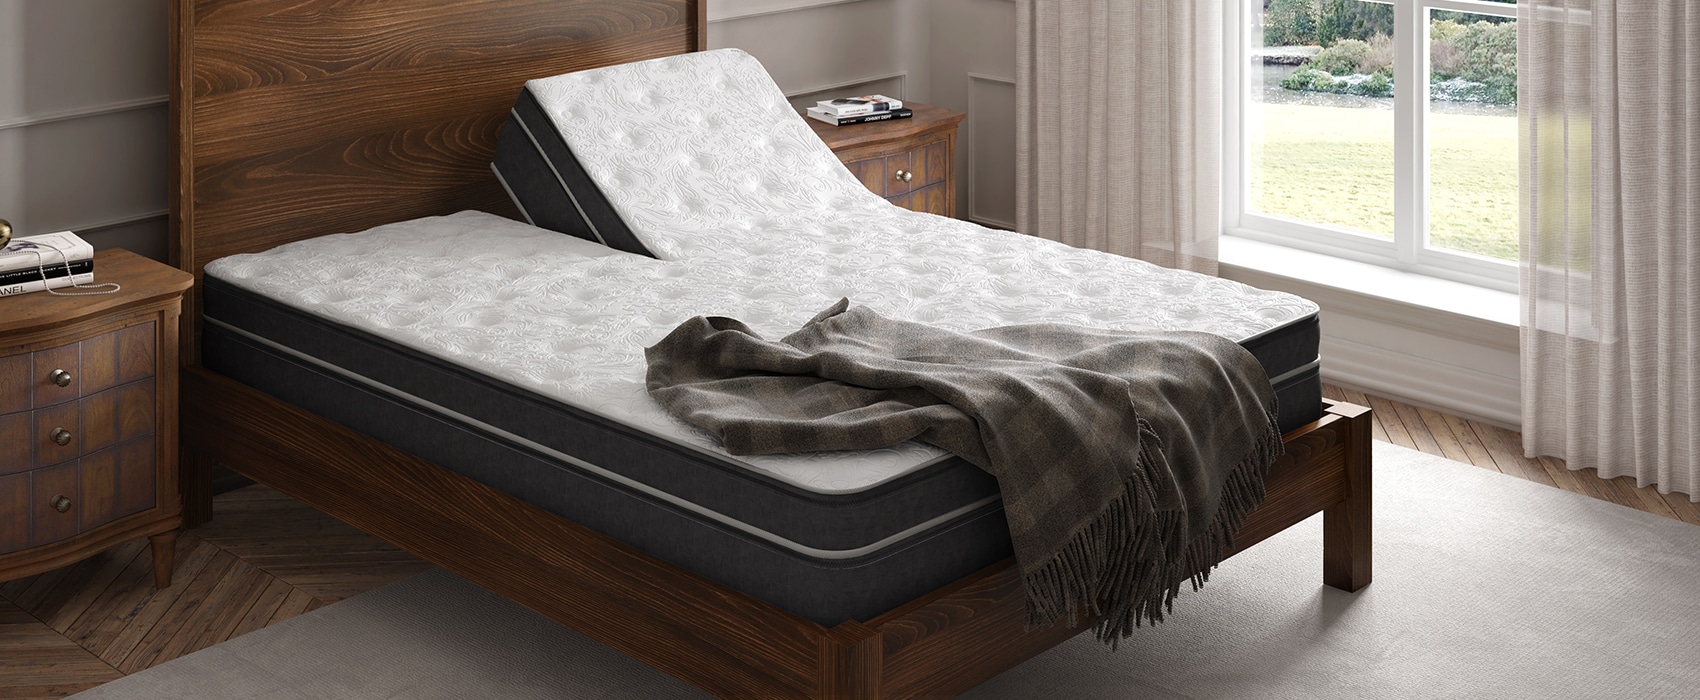 Rising Popularity of the Adjustable Bed - Mattress Express